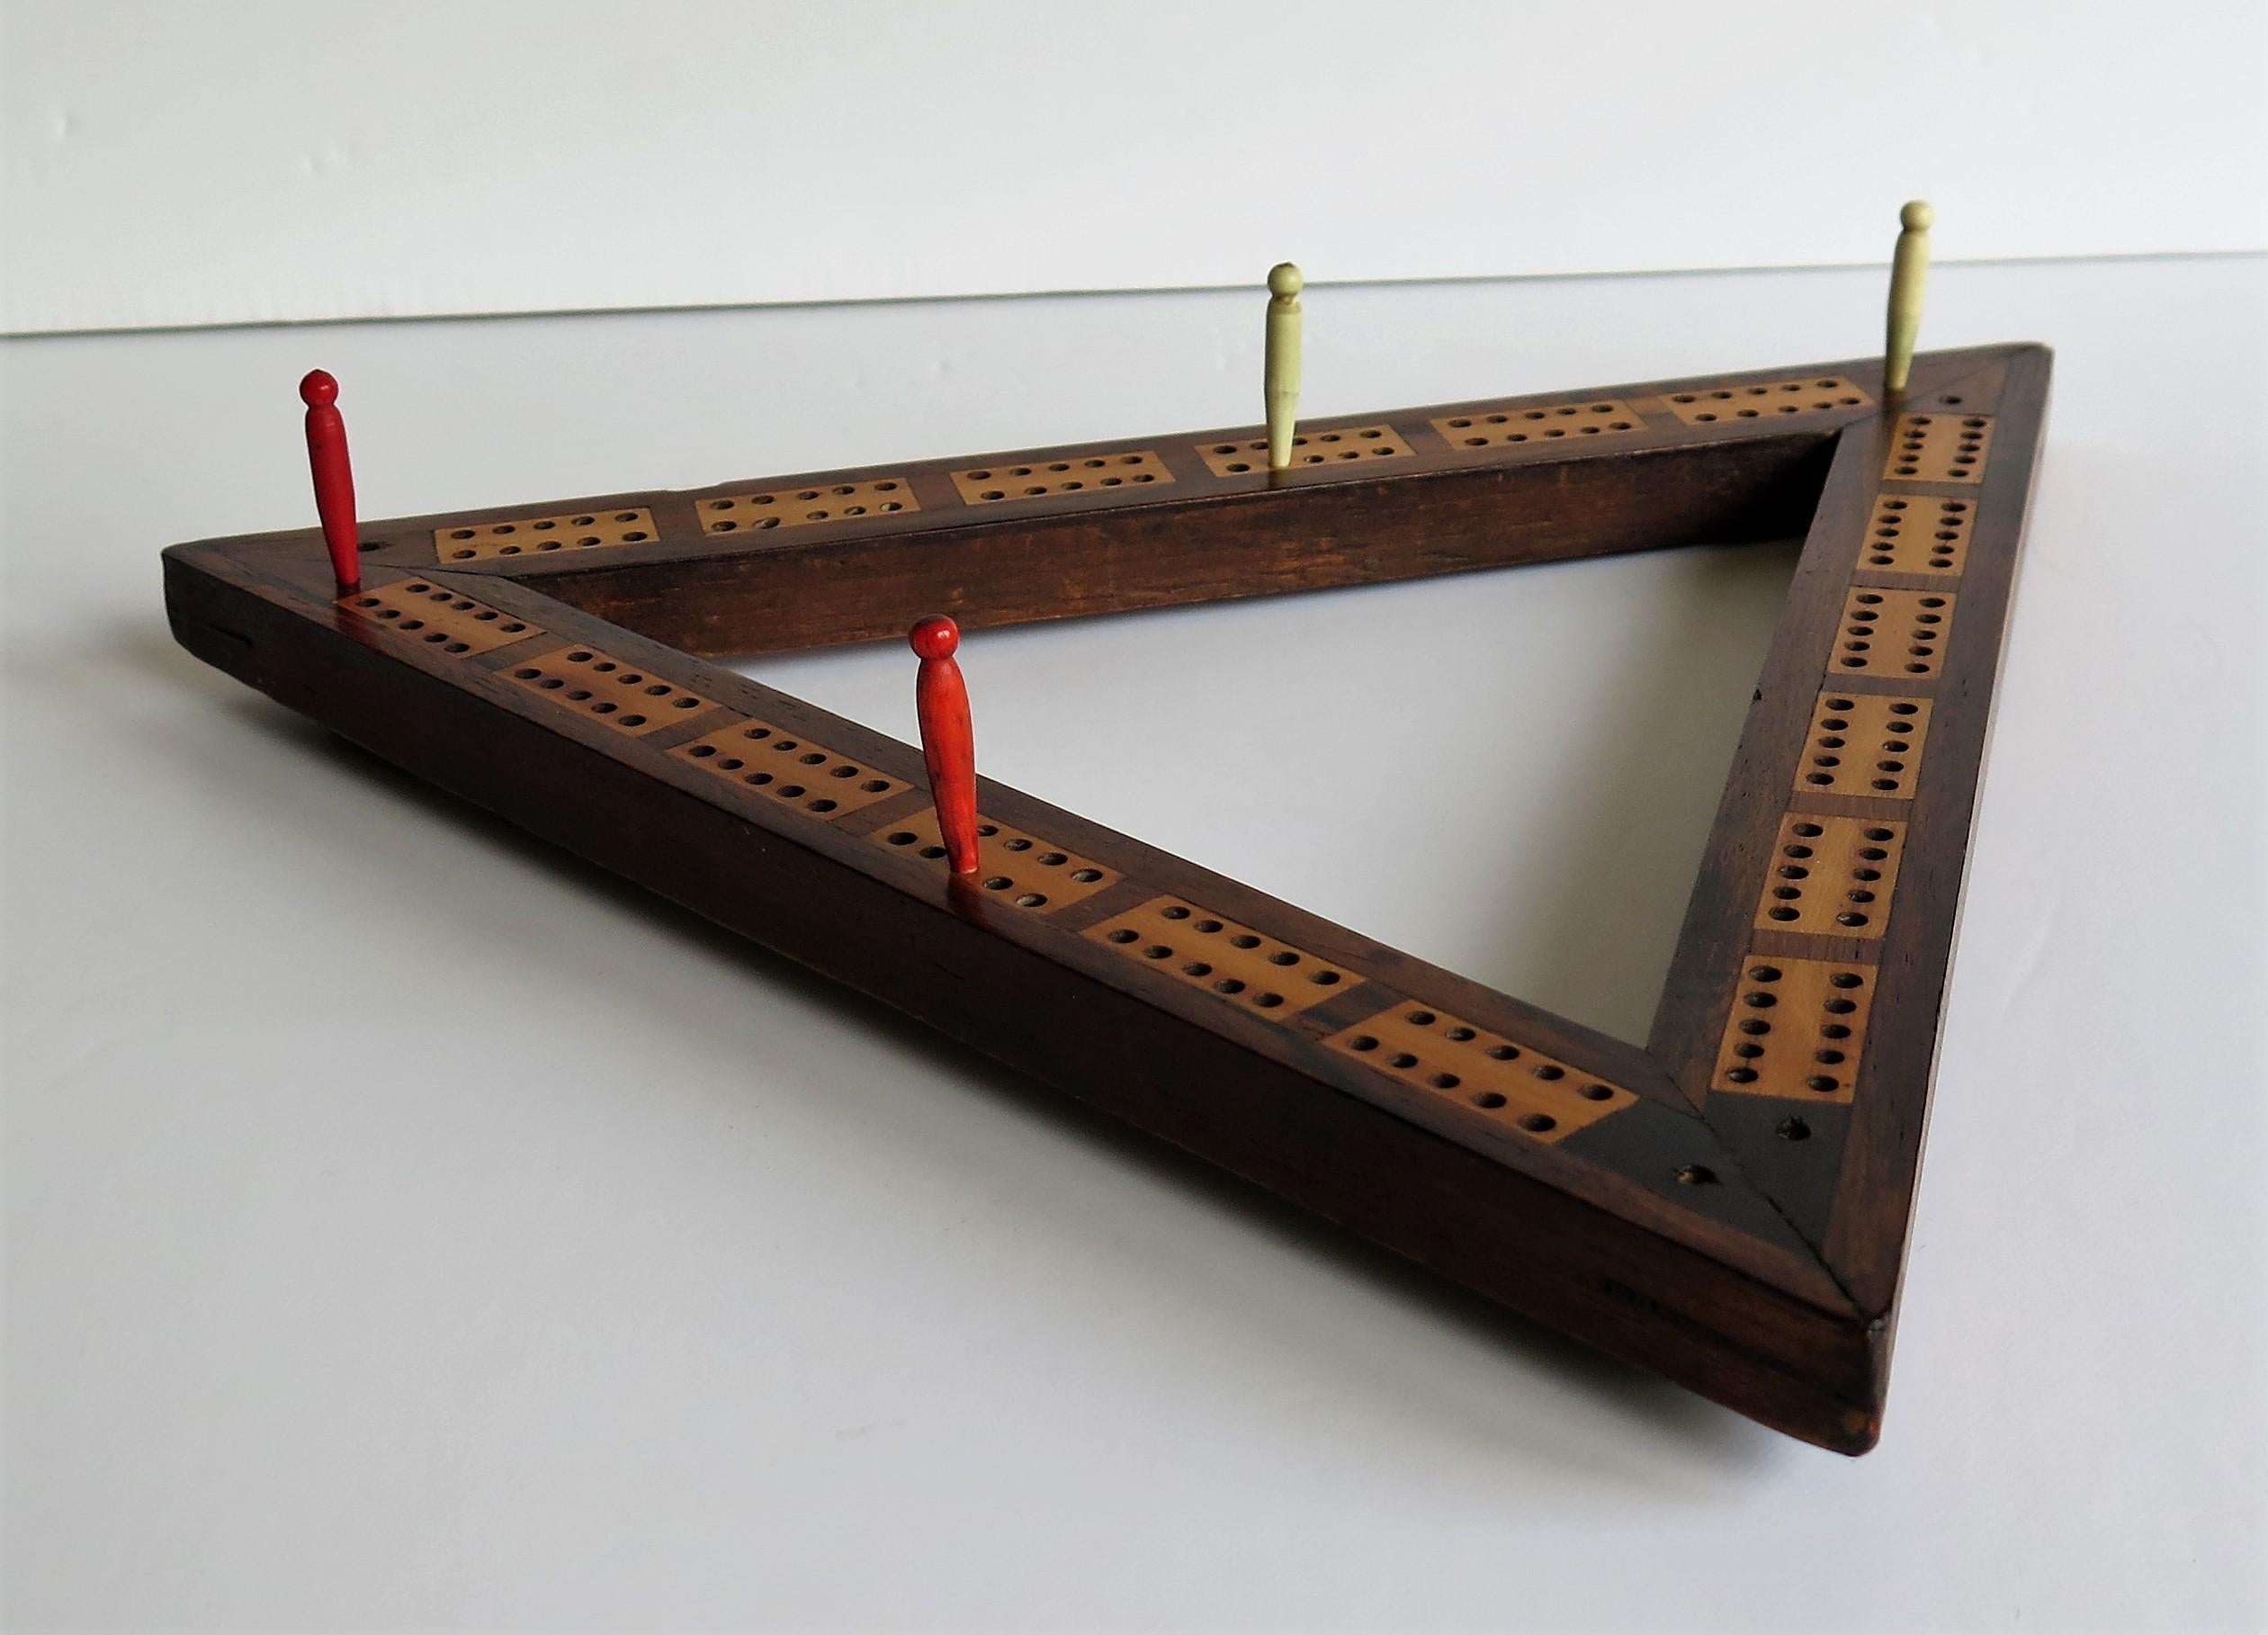 This is a late Georgian early 19th century, triangular shaped Cribbage game score board made of various inlaid woods and complete with four bone pegs.

This board is very well handmade with a triangular jointed frame which has been carefully inlaid